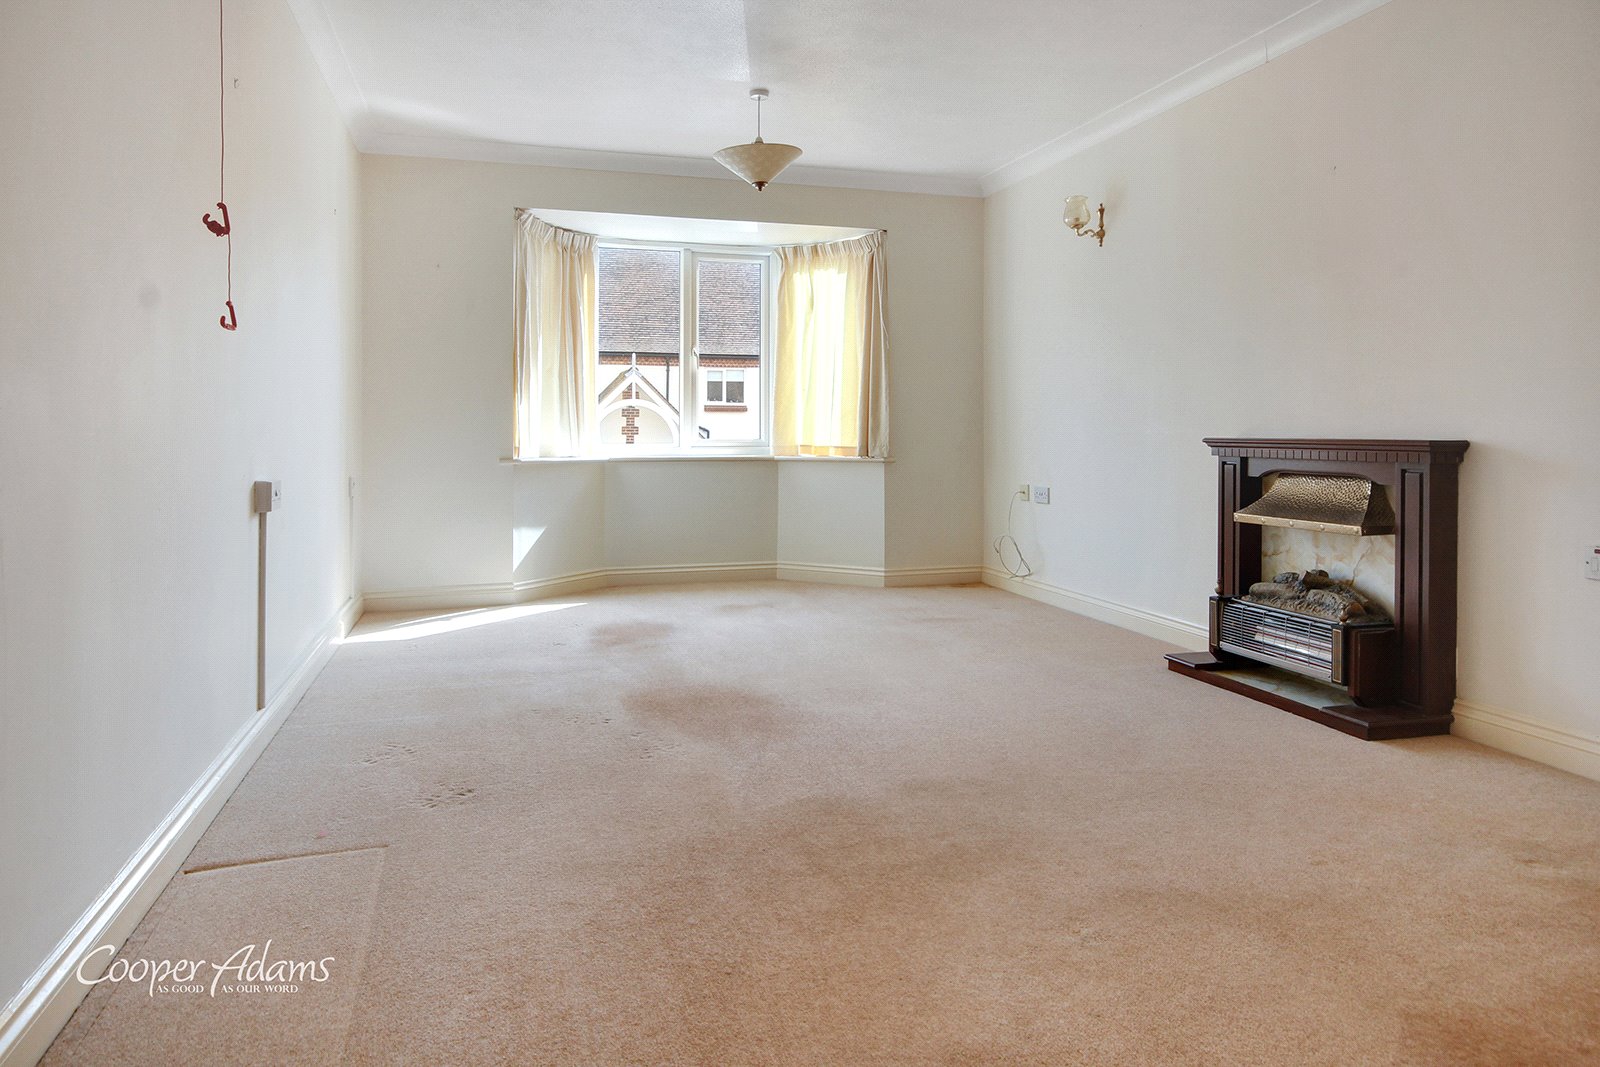 2 bed apartment for sale in Arundel Road, Angmering 2